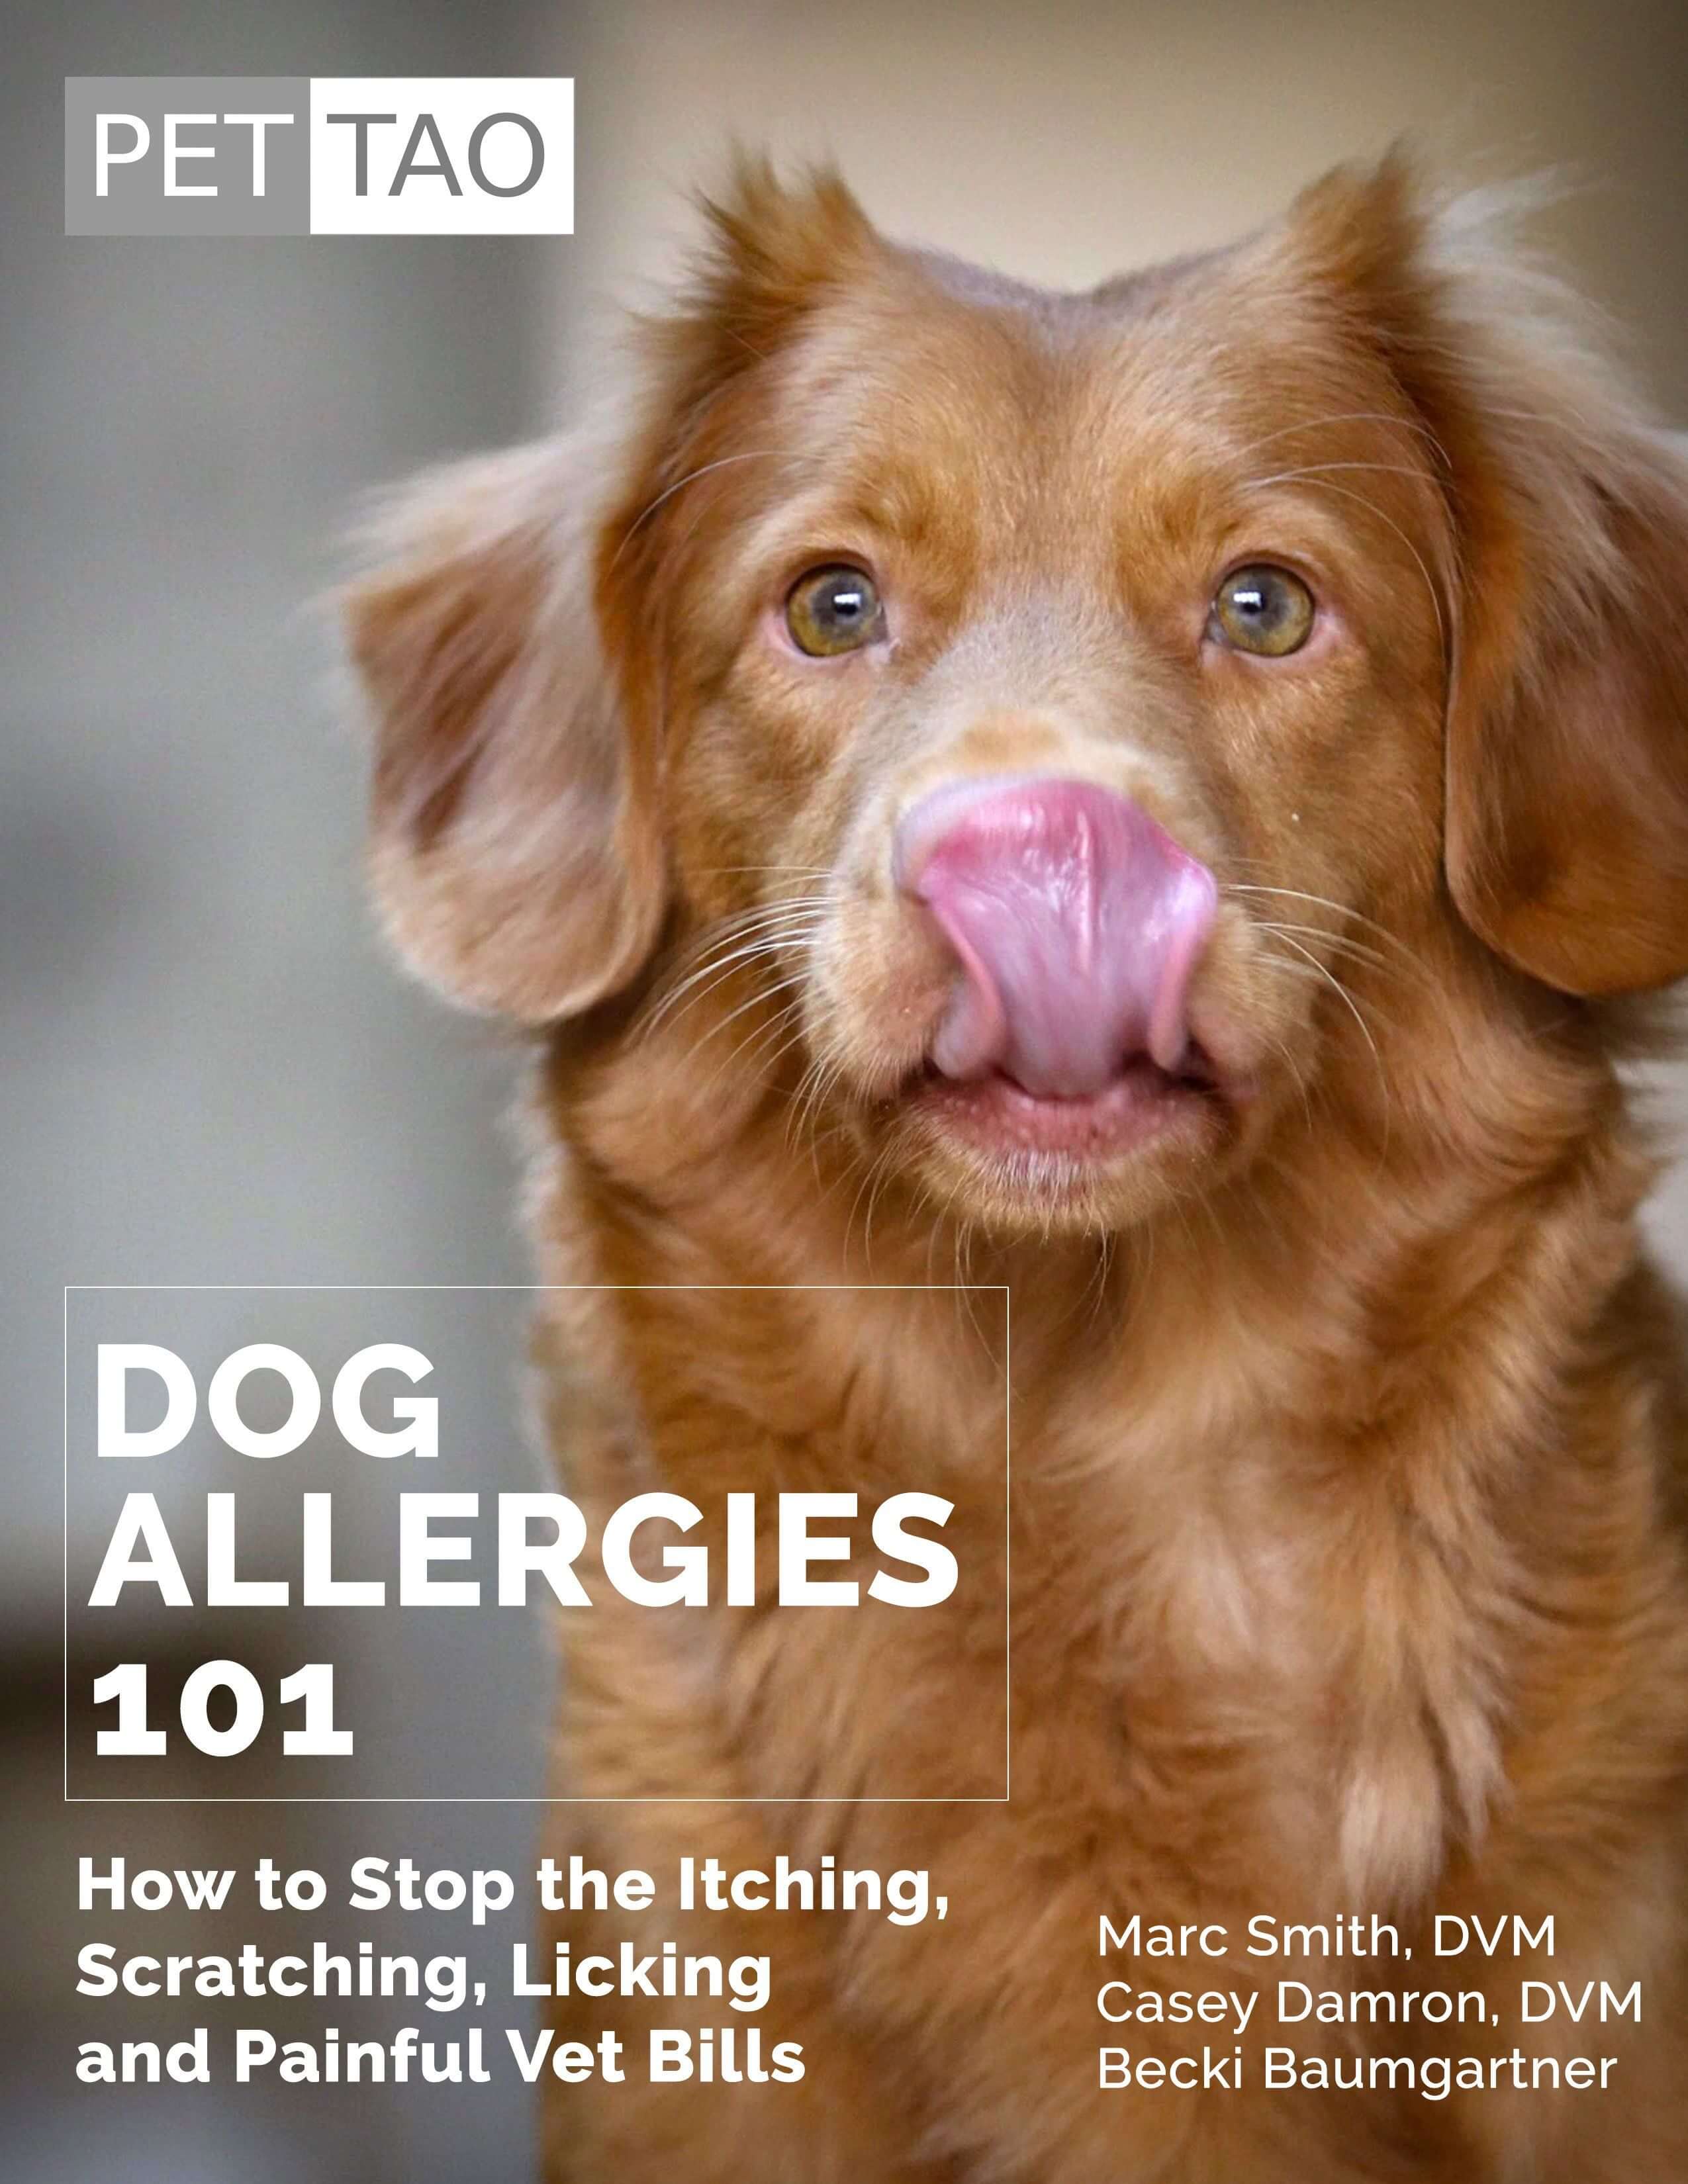 Dog Allergies 101 Ebook: How to Stop the Itching, Scratching, Licking and Painful Vet Bills